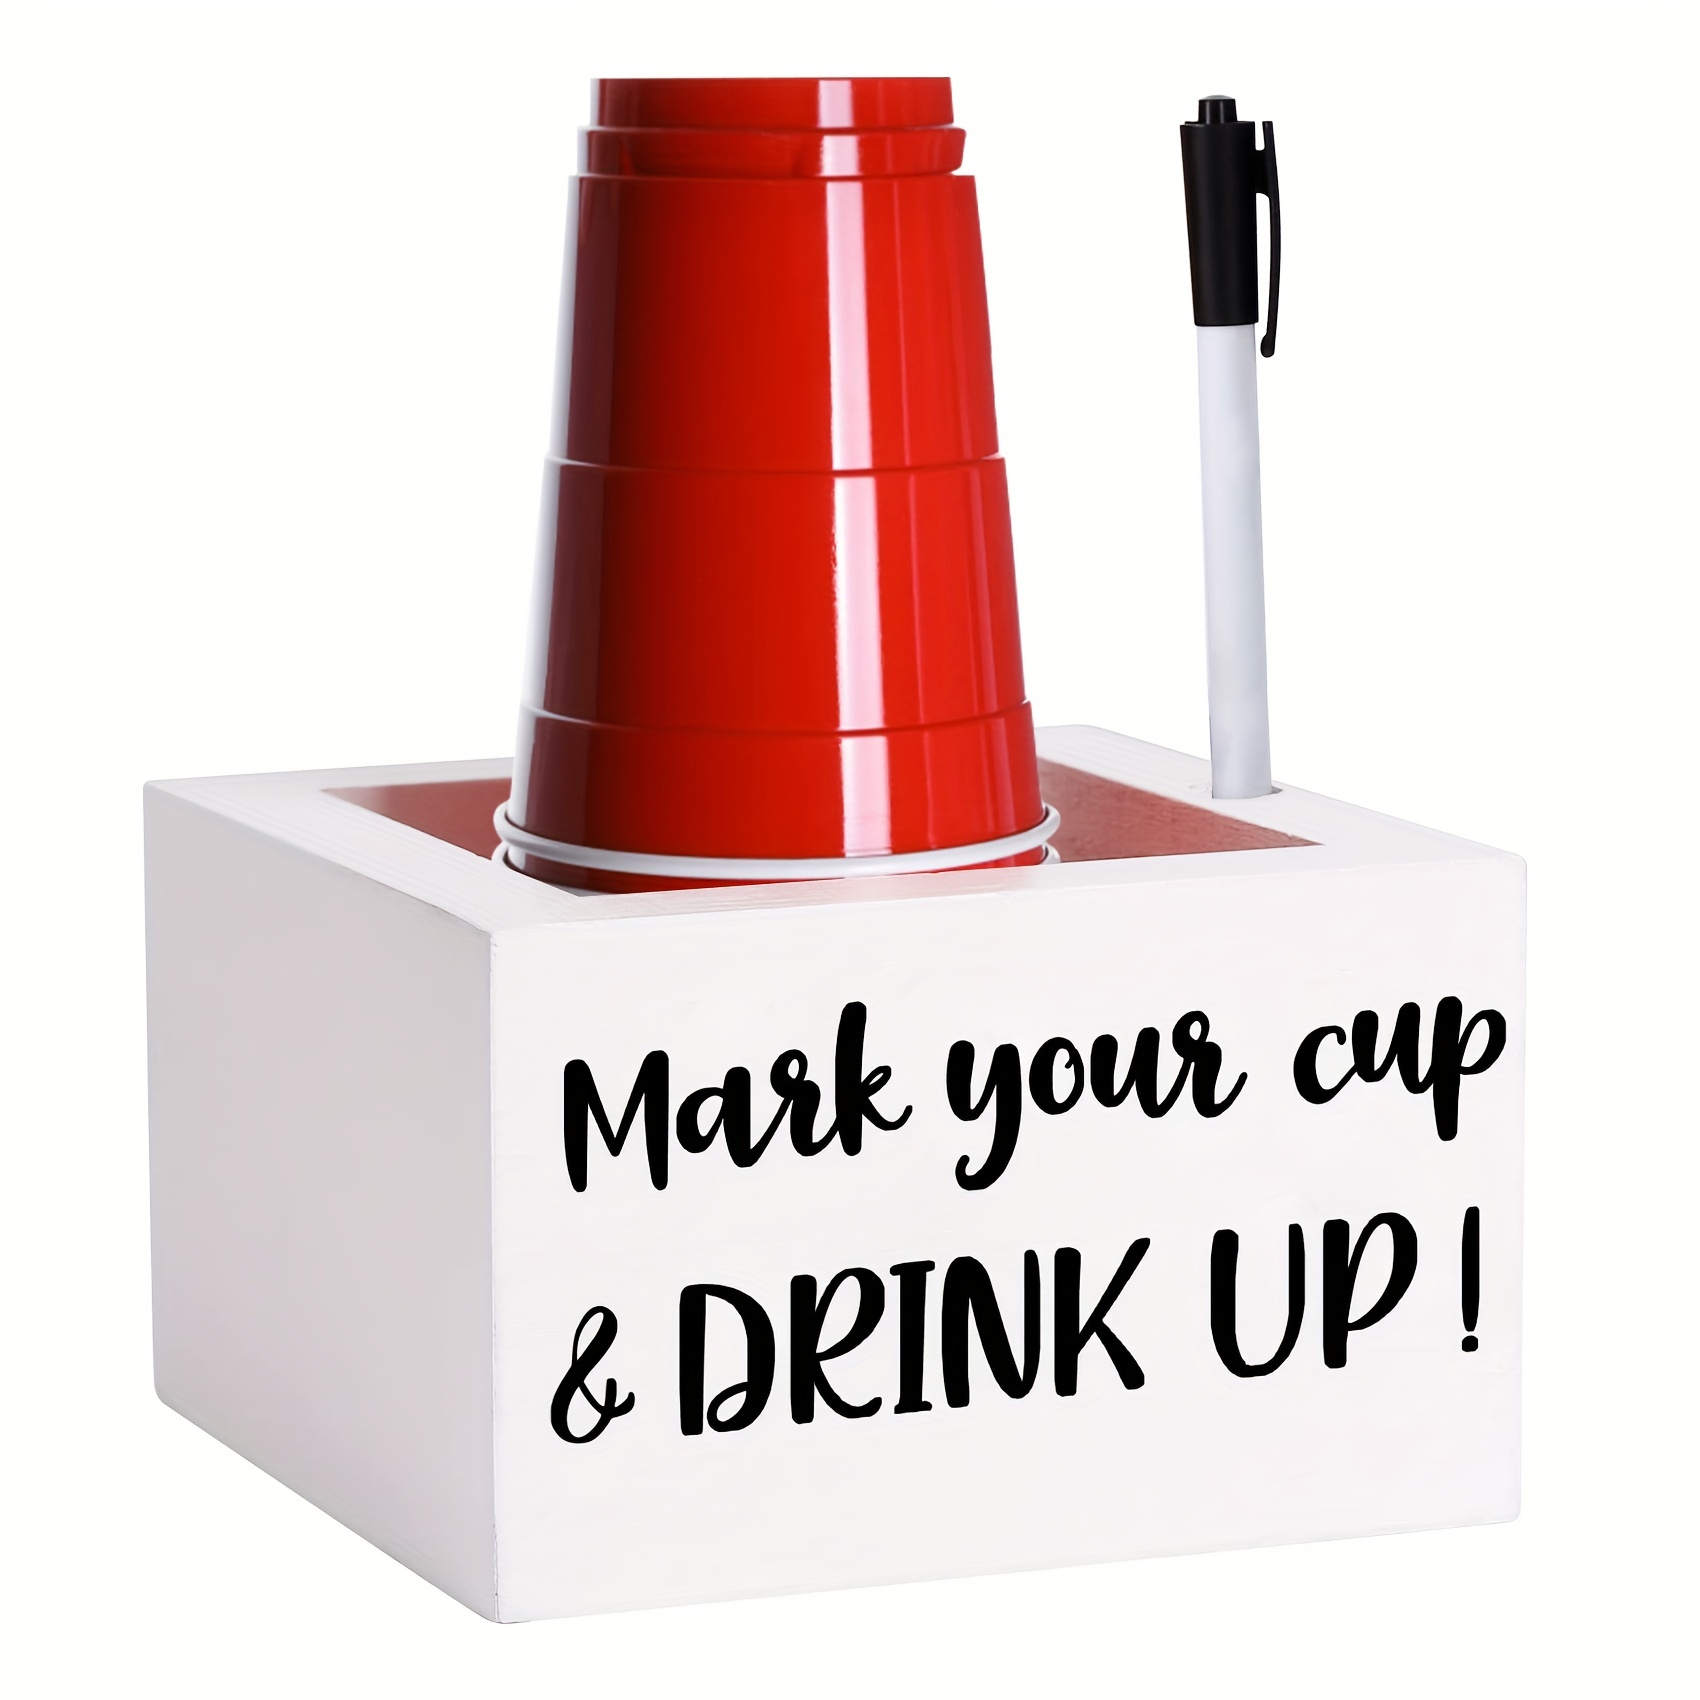 1pc Solo Cup Holder With Marker Slot, Wooden Mark Your Cup And Drink Up Cup Holder, Party Cup Organizer, 2 Sides Designs Drink Dispensers, For Farmhou